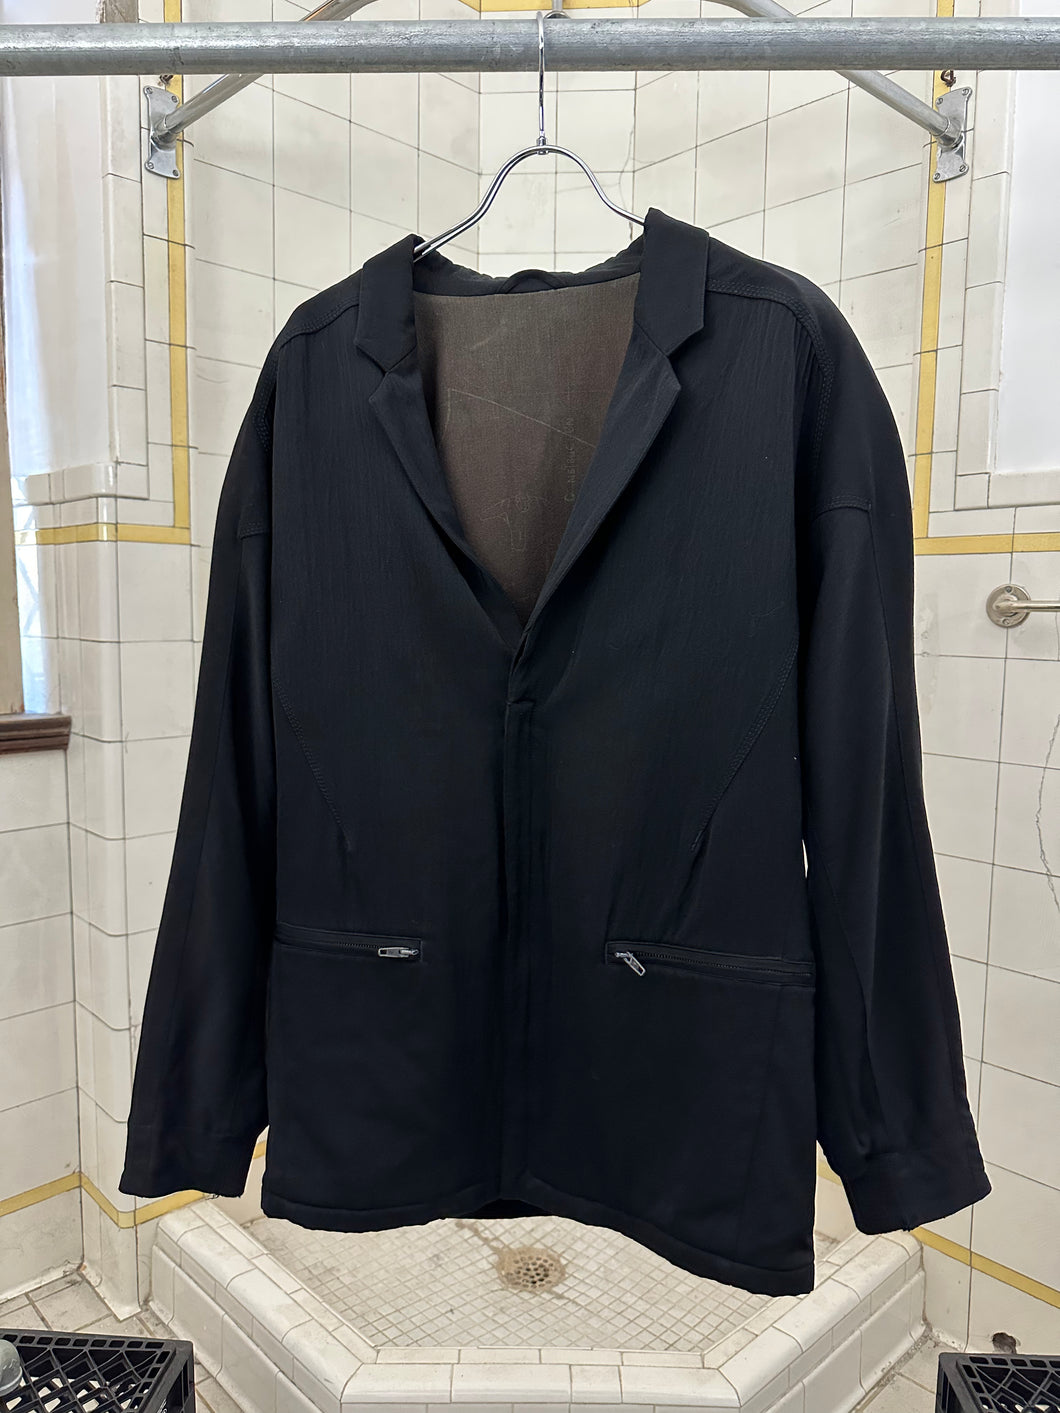 1980s Marithe Francois Girbaud x Momentodue Black Blazer with Shoulder Pads - Size L